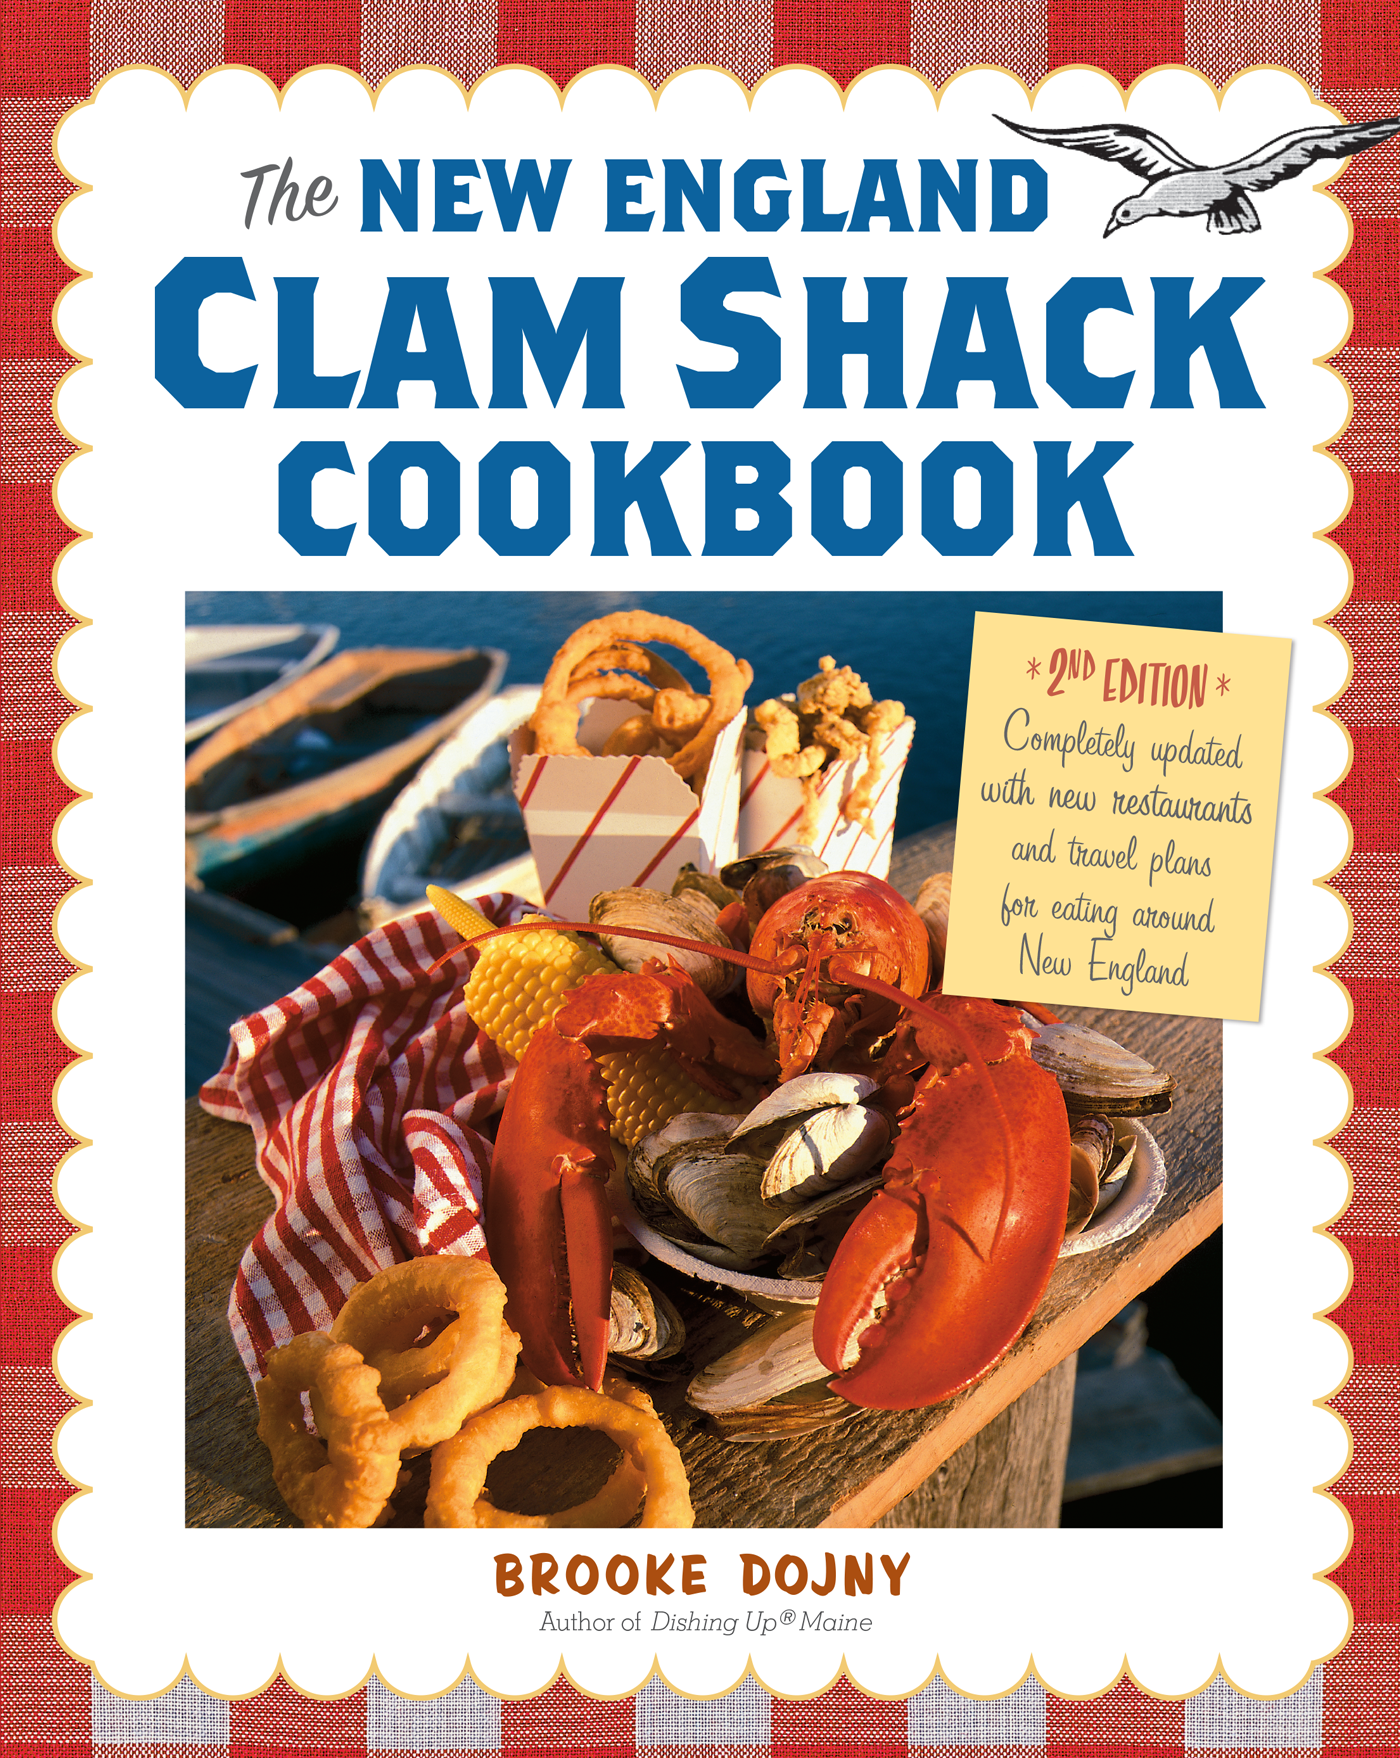 Praise for The New England Clam Shack Cookbook delightful reading - photo 1